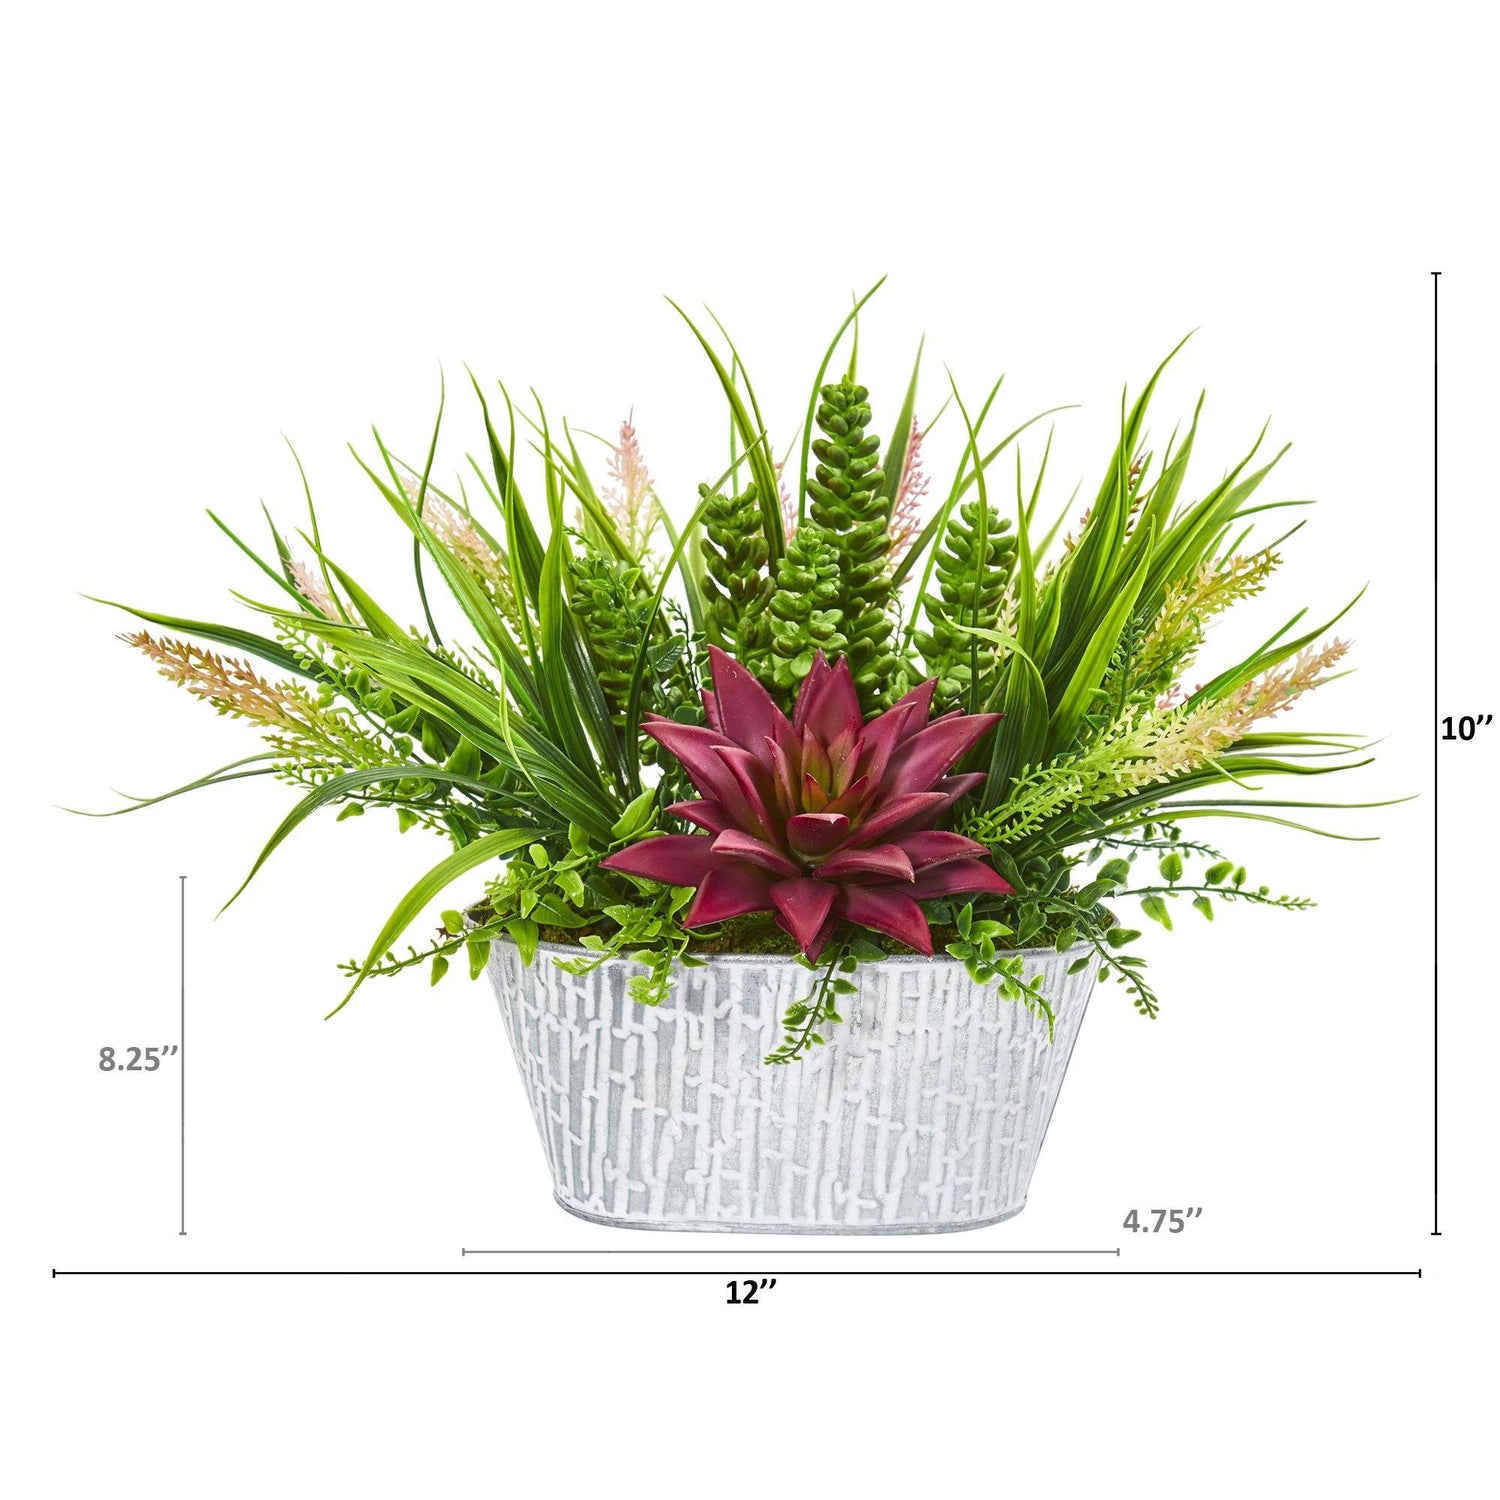 10” Succulent and Grass Artificial Plant in White Tin Planter